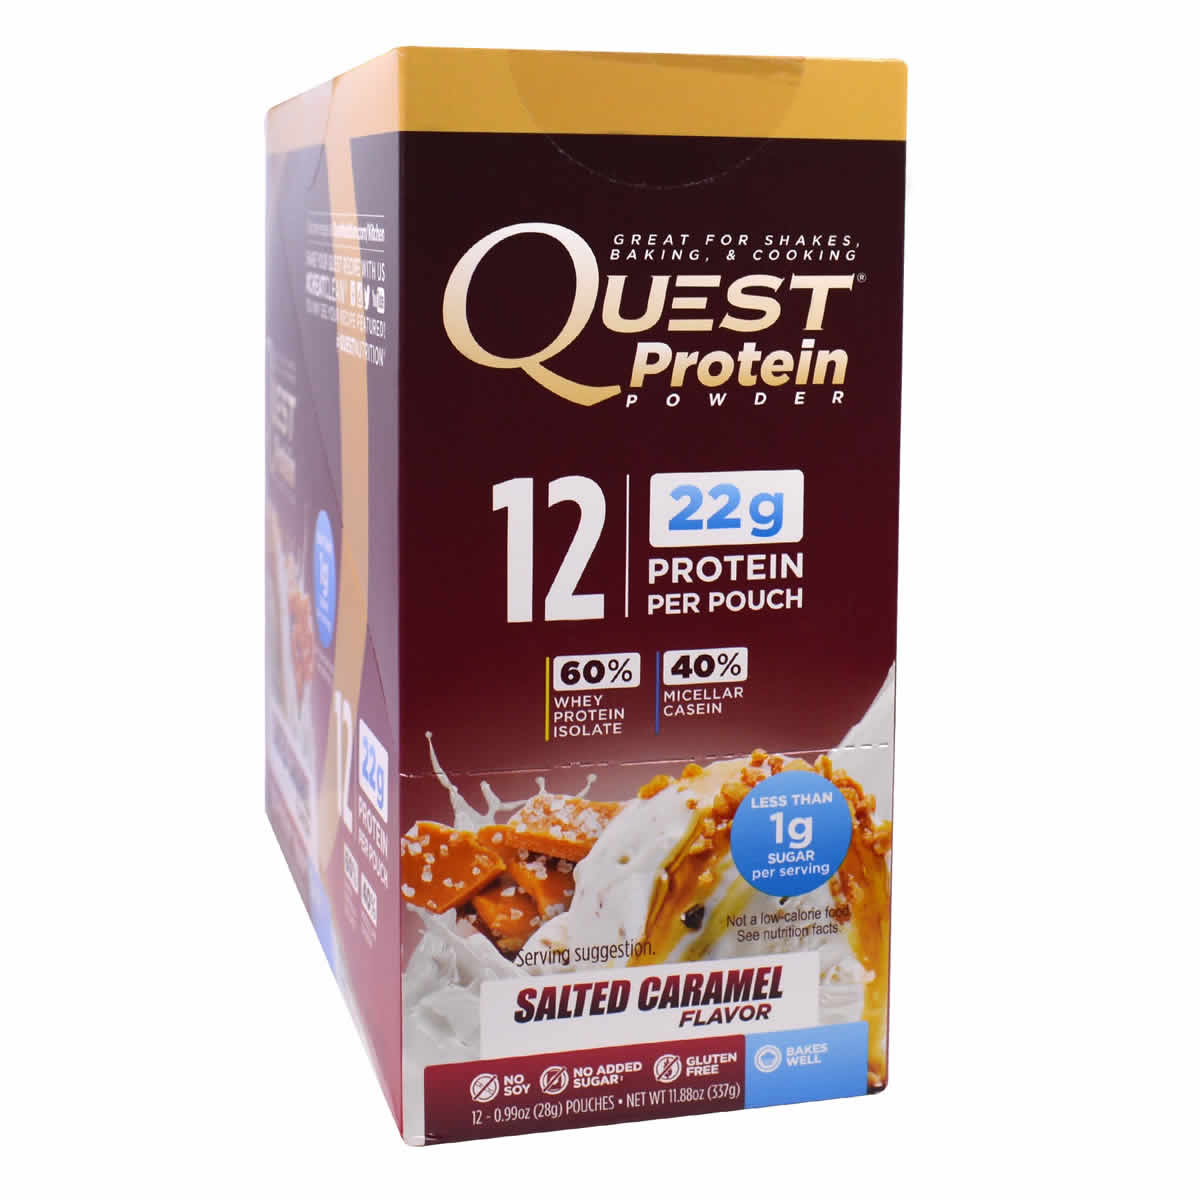 quest protein powder sample pack